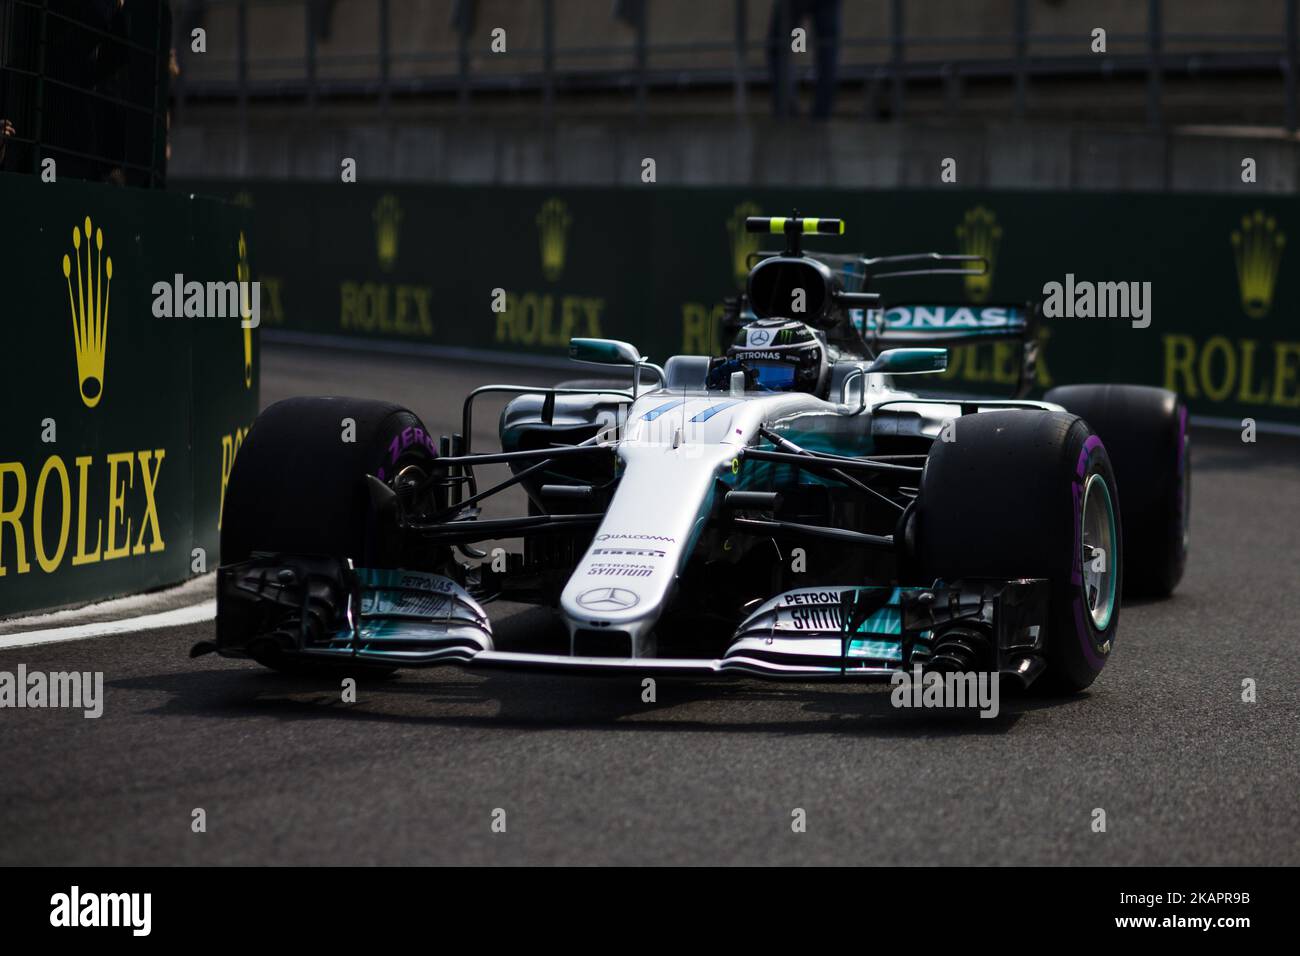 77 BOTTAS Valtteri from Finland of team Mercedes GP during the Qualifying of Formula One Belgian Grand Prix at Circuit de Spa-Francorchamps on August 25, 2017 in Spa, Belgium. (Photo by Xavier Bonilla/NurPhoto) Stock Photo